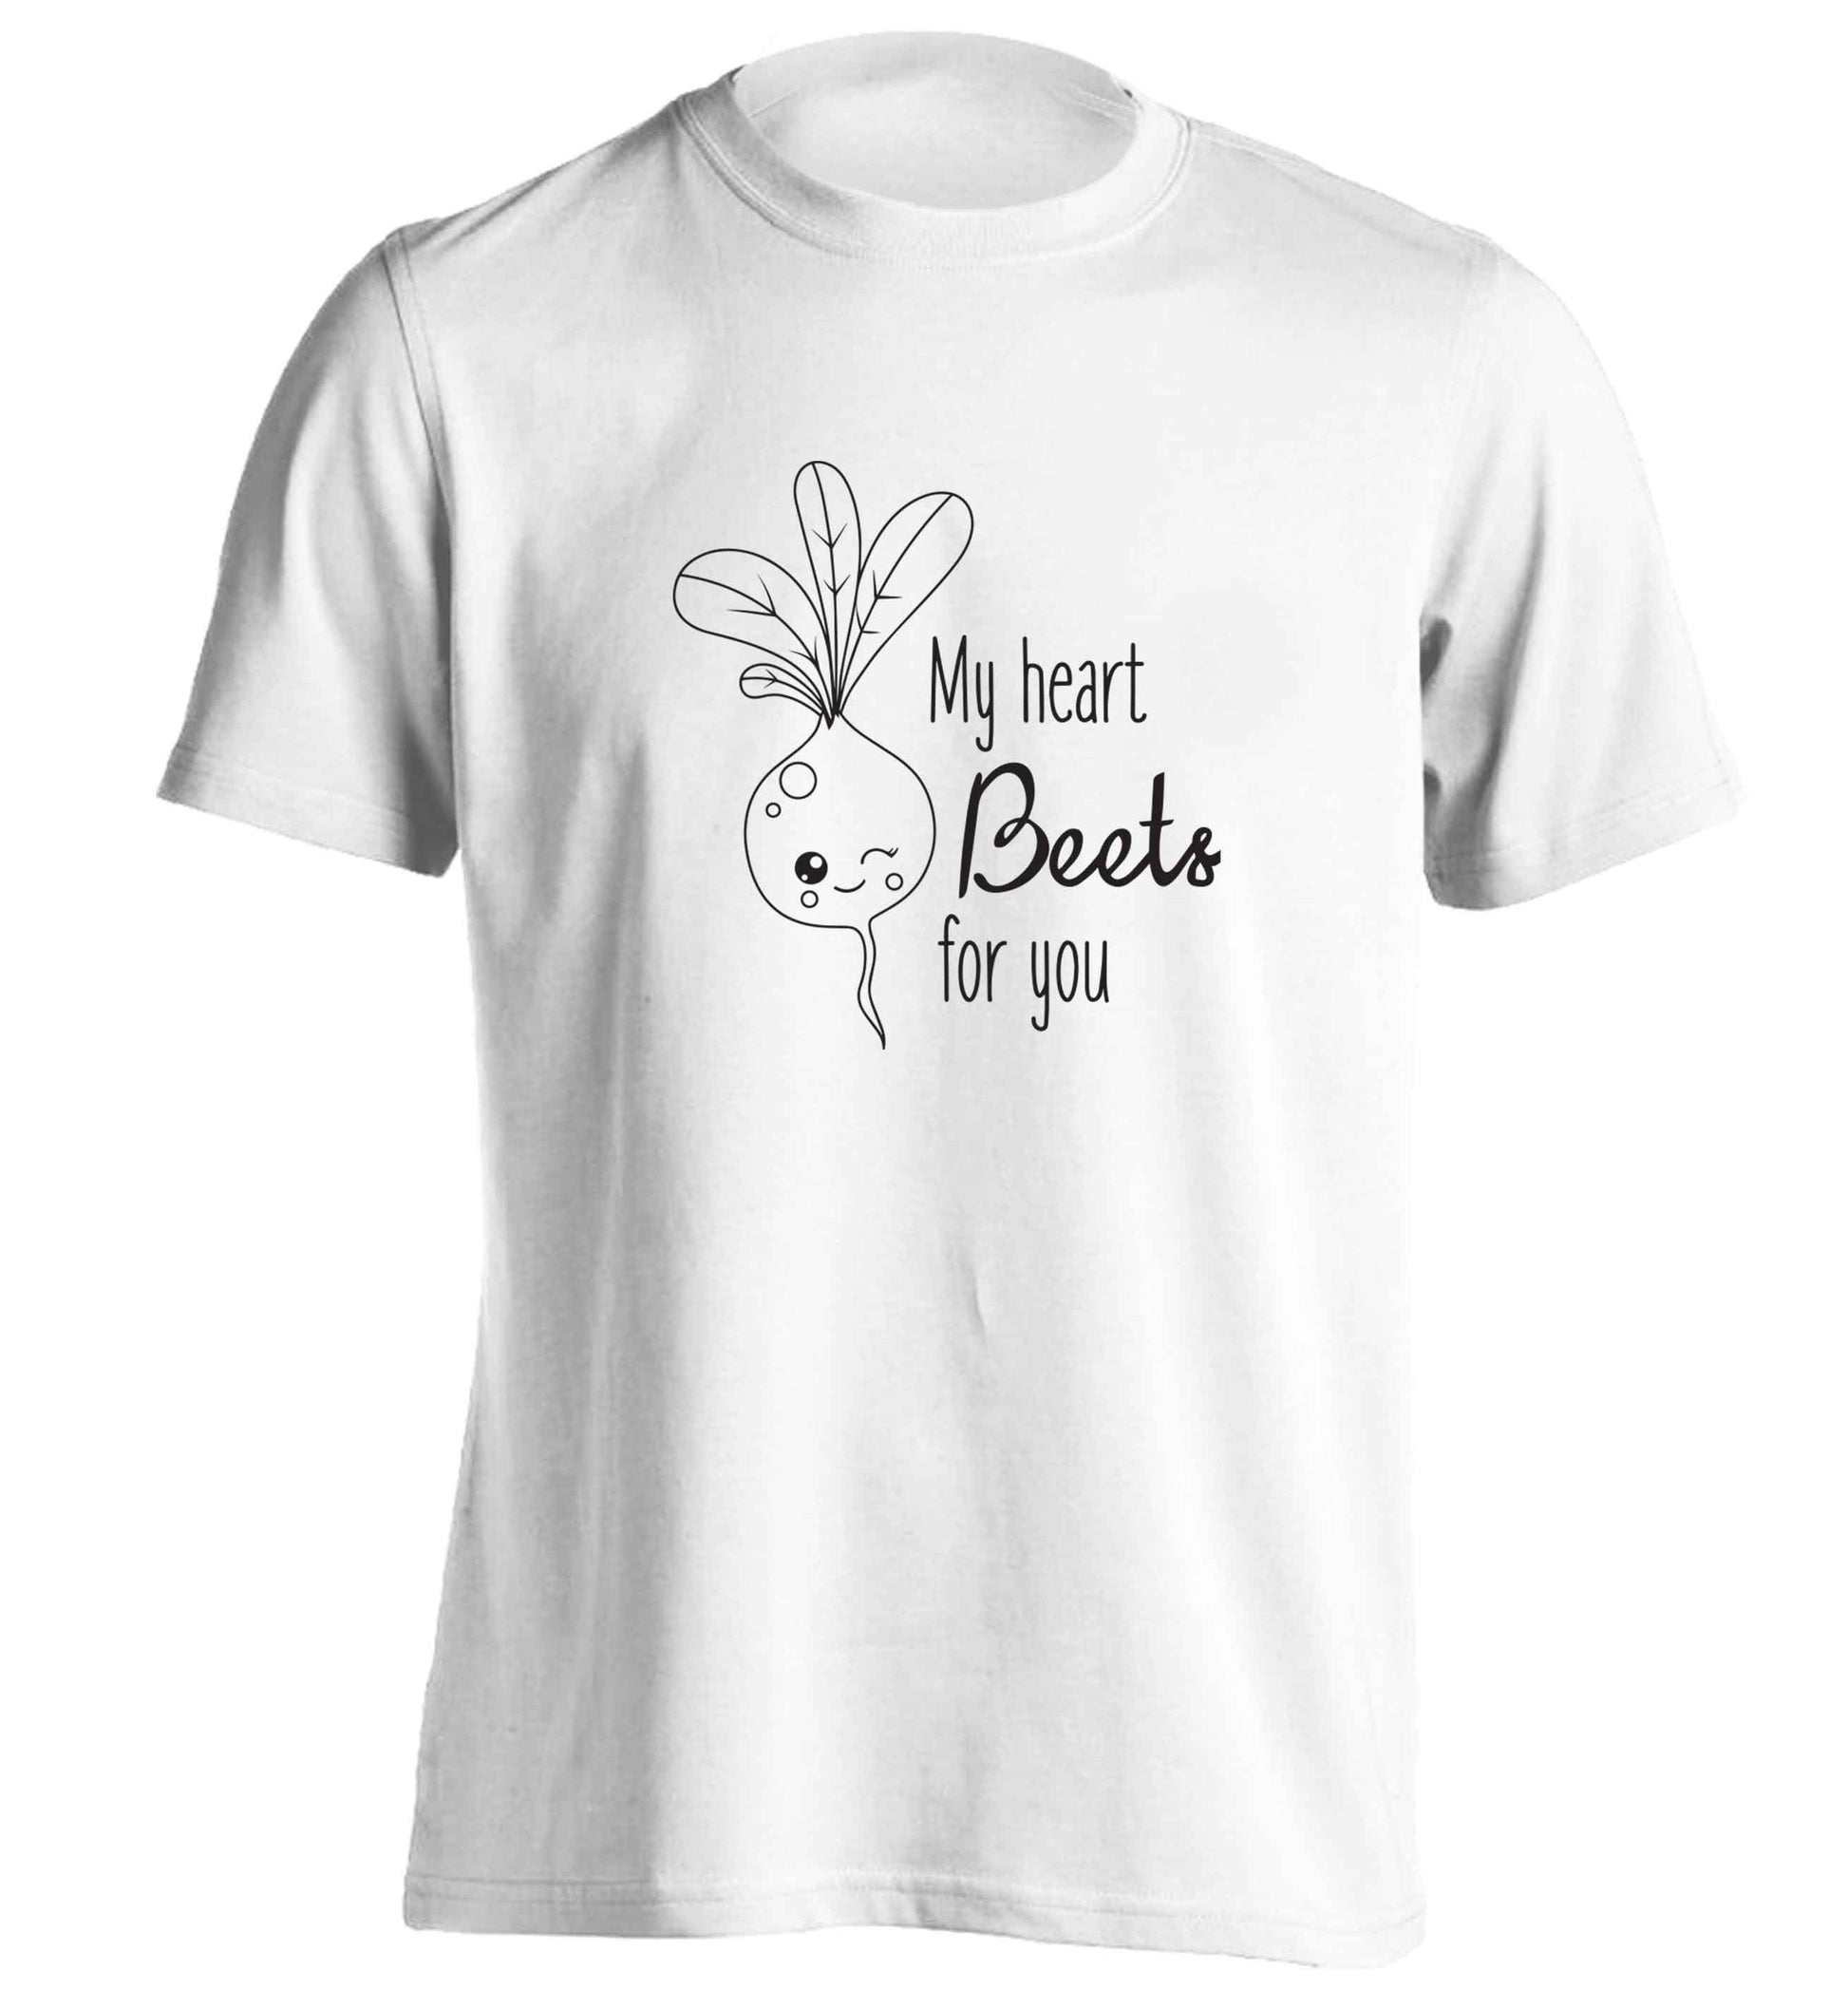 My heart beets for you adults unisex white Tshirt 2XL